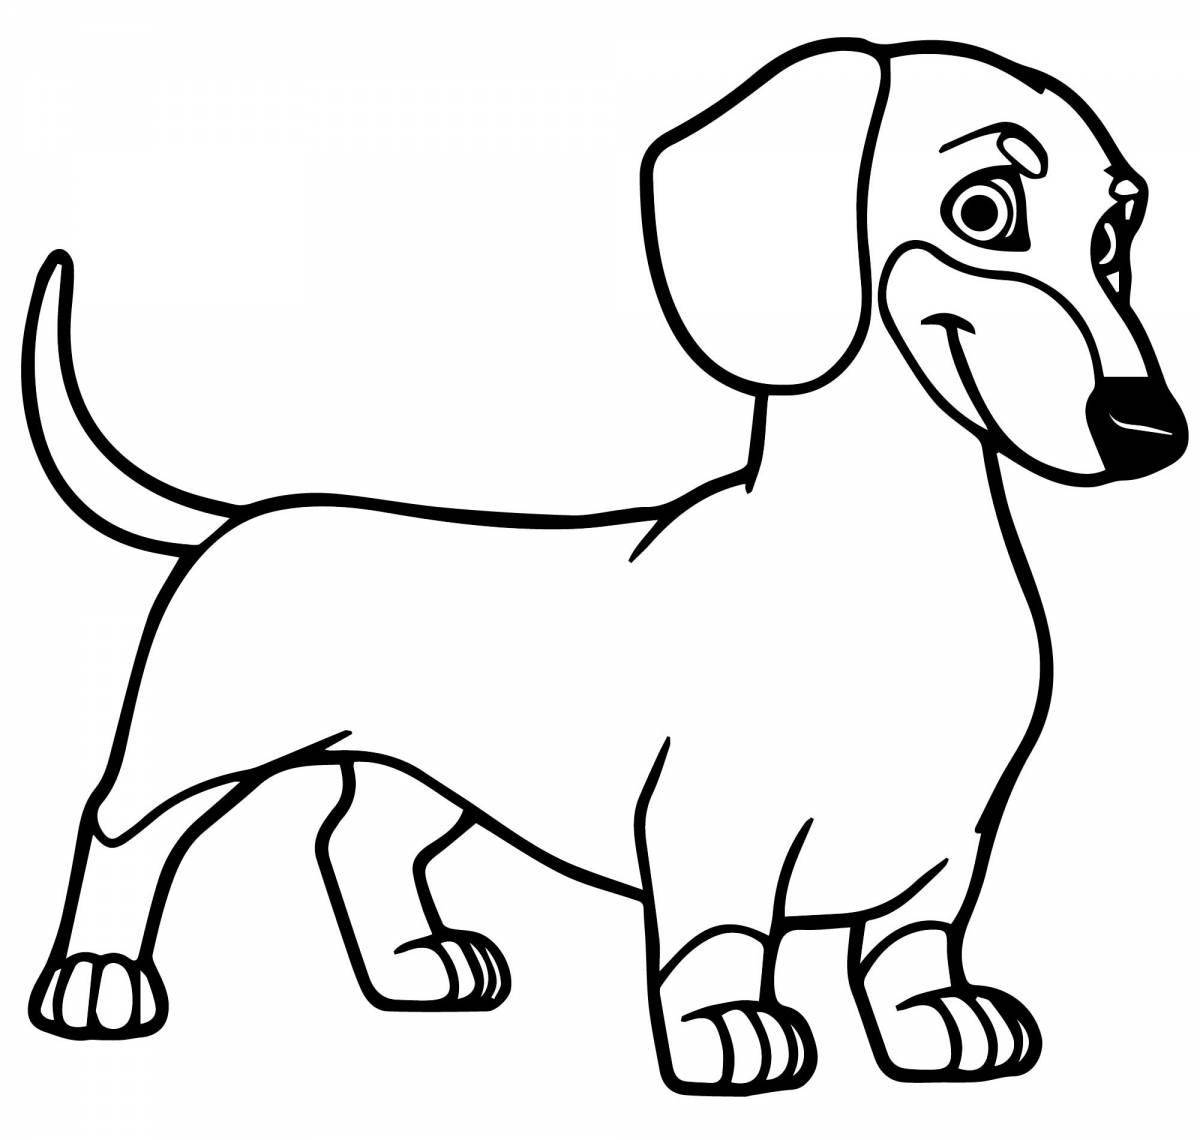 Coloring page mischievous dachshund